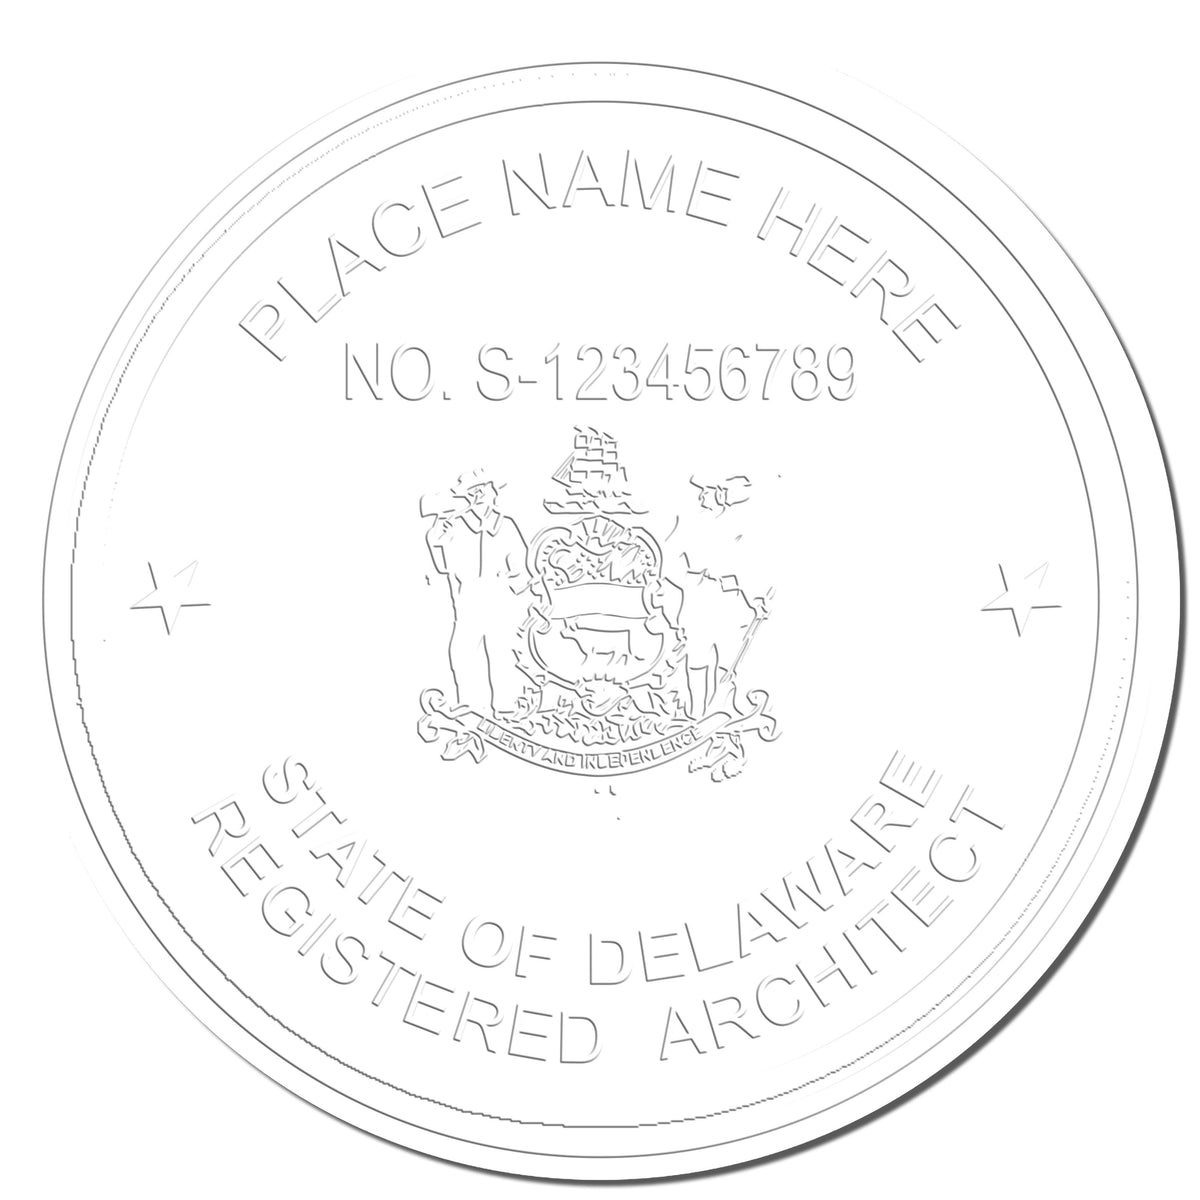 This paper is stamped with a sample imprint of the State of Delaware Architectural Seal Embosser, signifying its quality and reliability.